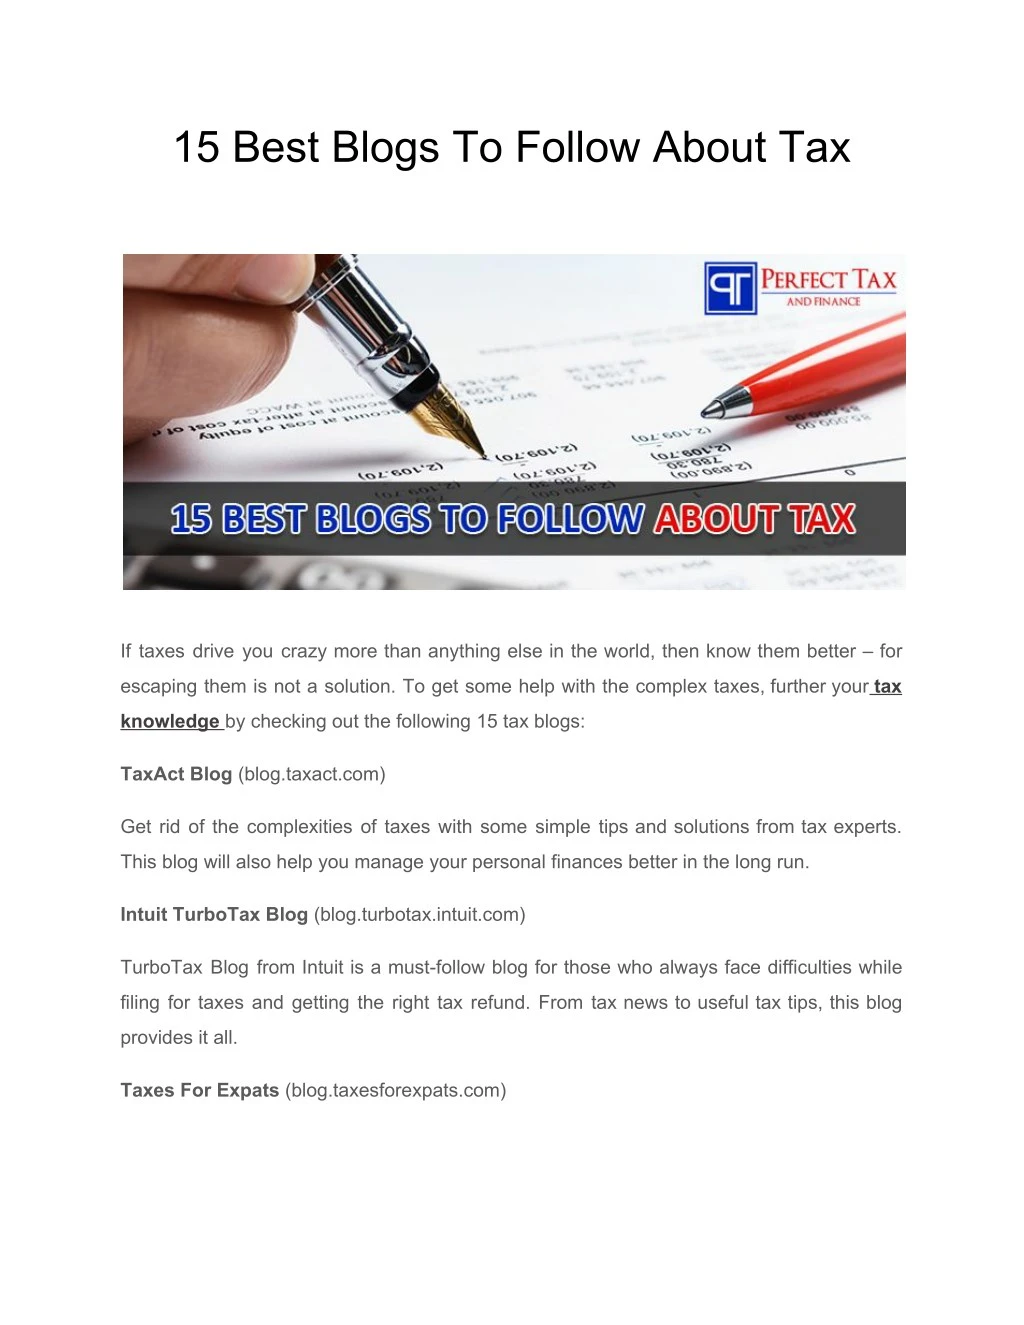 15 best blogs to follow about tax